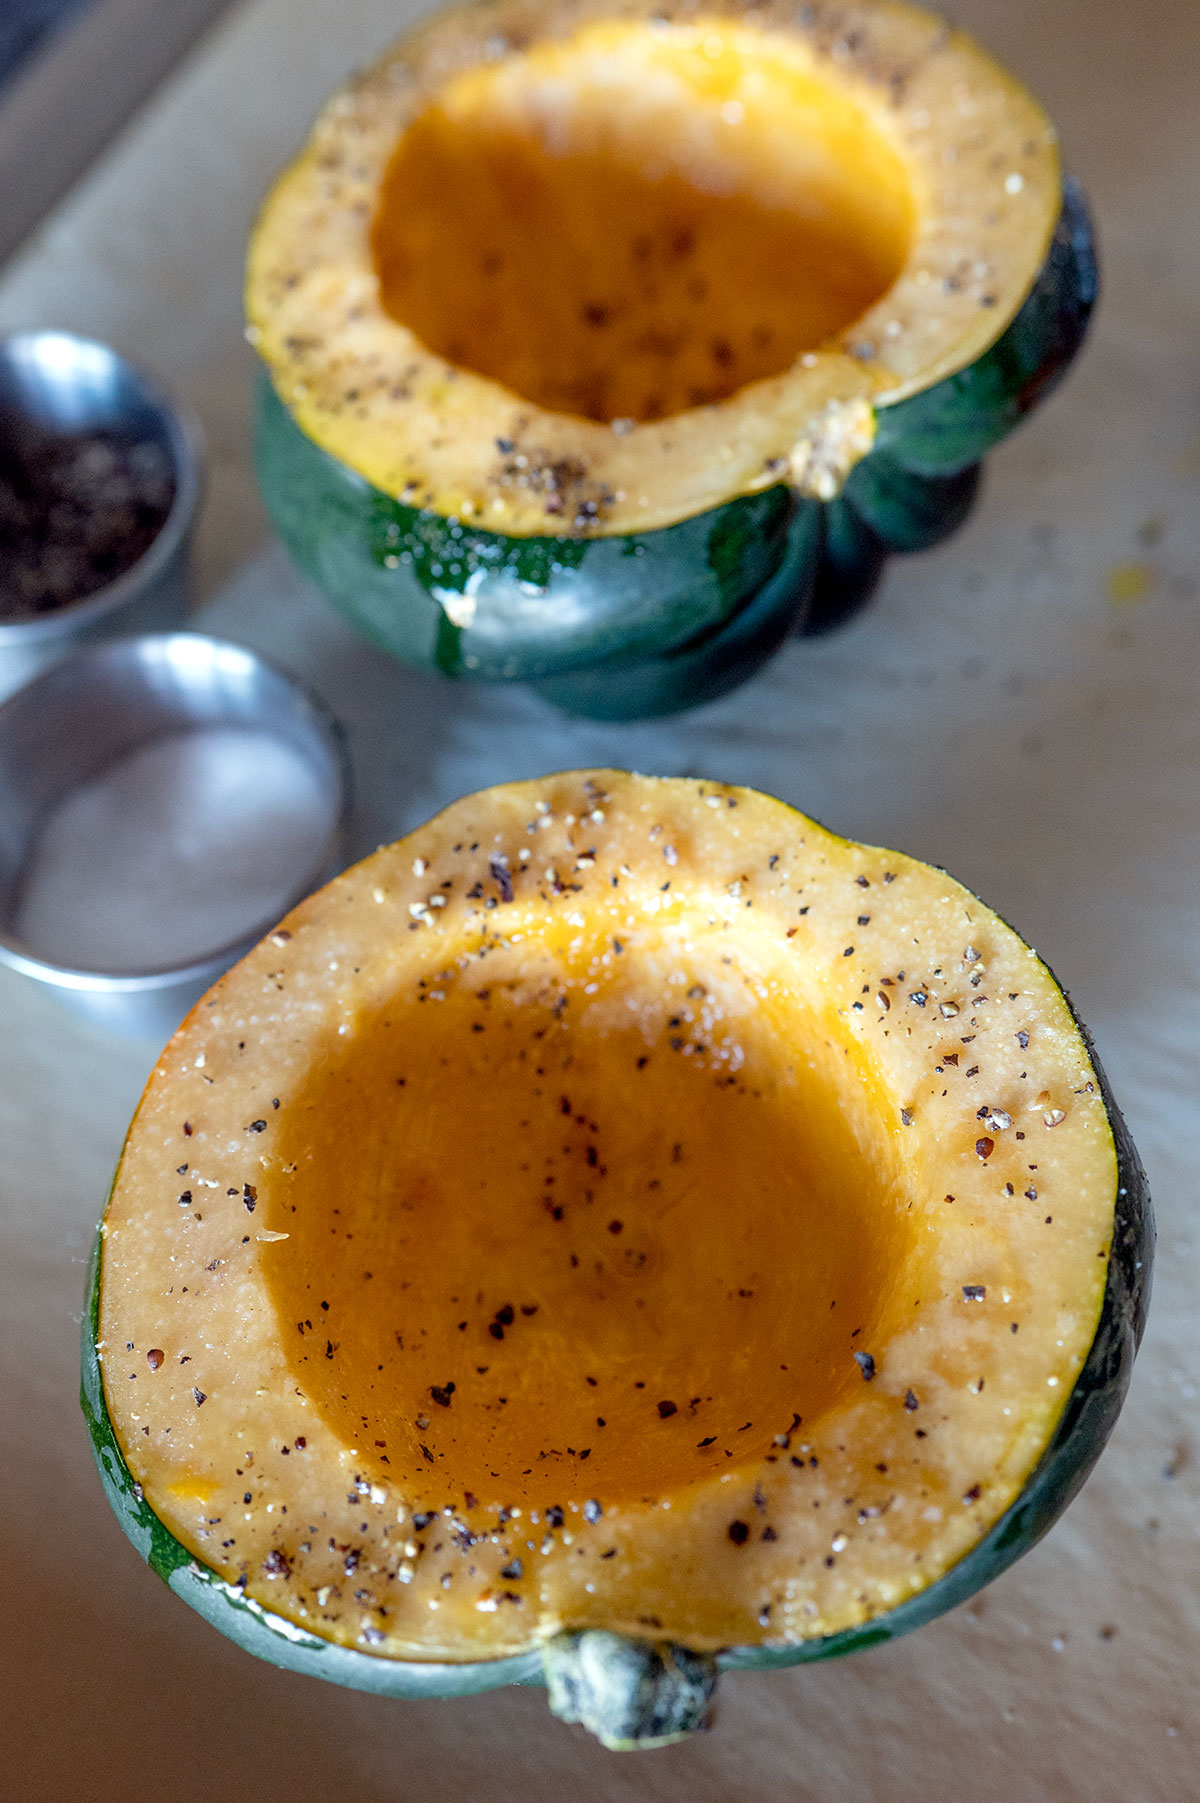 Acorn squash cut in half and seasoned with salt and pepper.